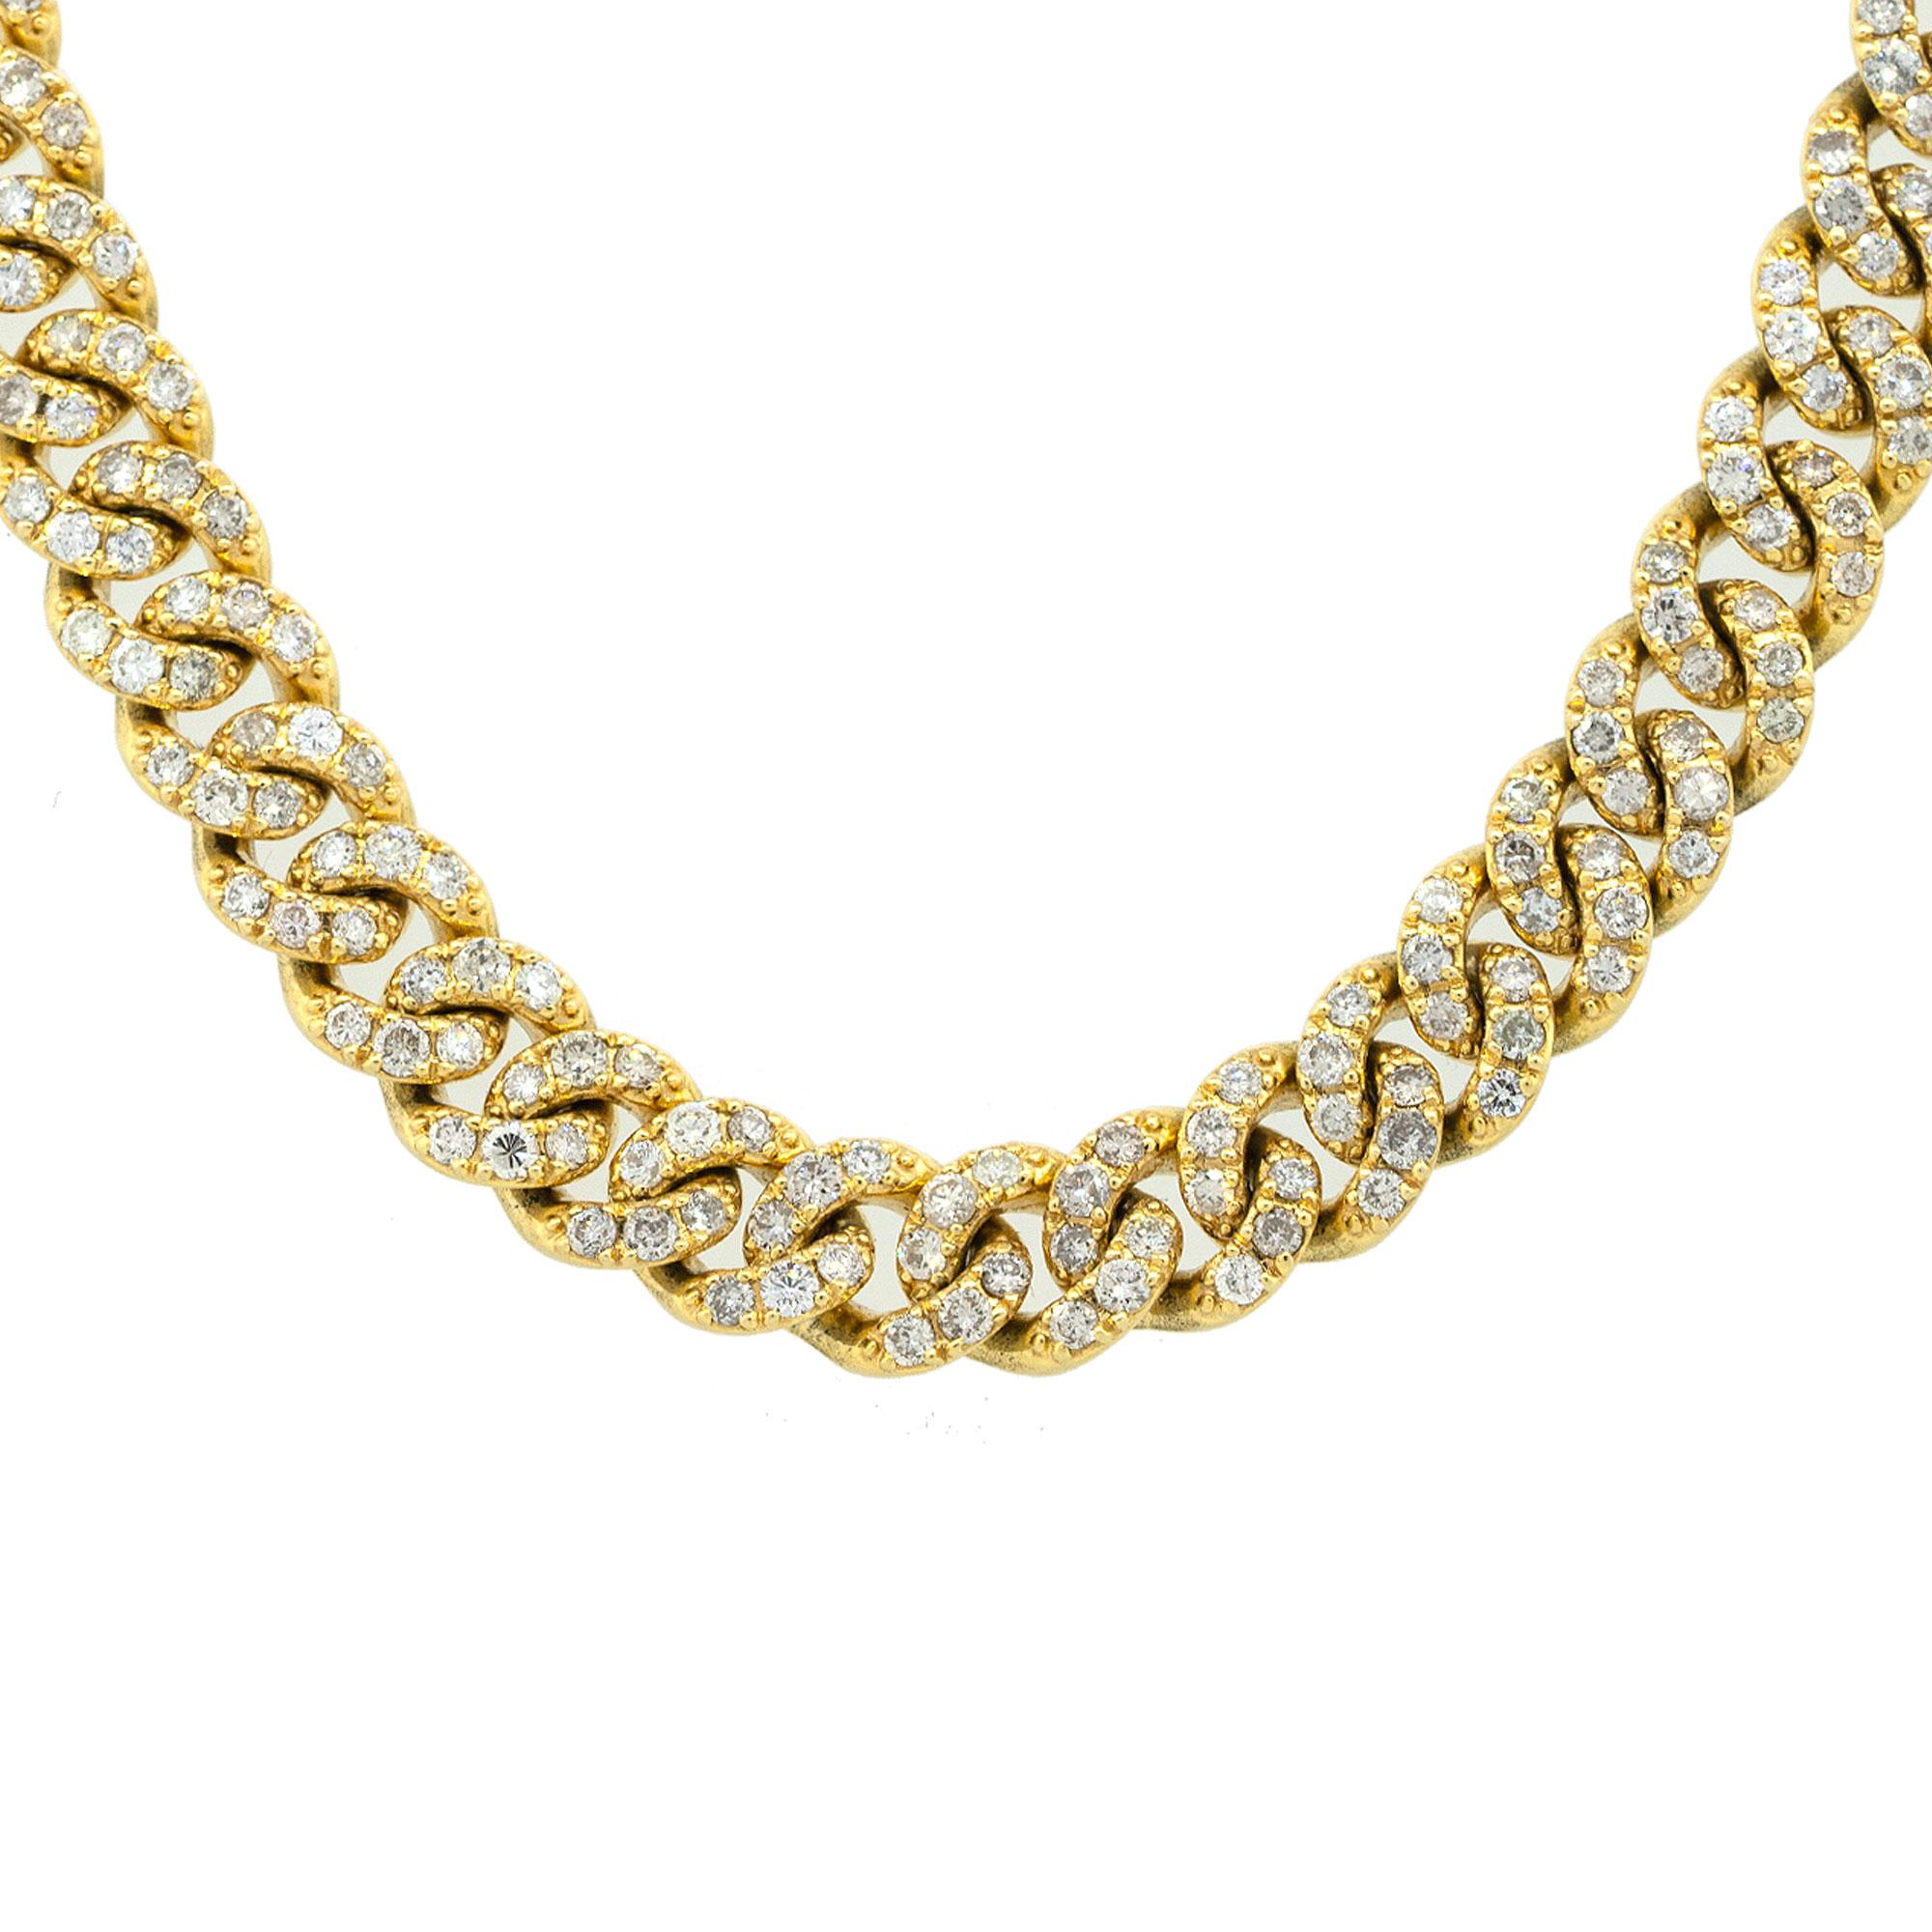 Material: 10k yellow Gold
Diamond Details: Approx. 14.80ctw of round cut diamonds. Diamonds are G/H in color and VS in clarity
Measurements: Necklace measures 22″ in length.
Fastening: Tongue in box clasp with safety latch
Item Weight: 78.5g